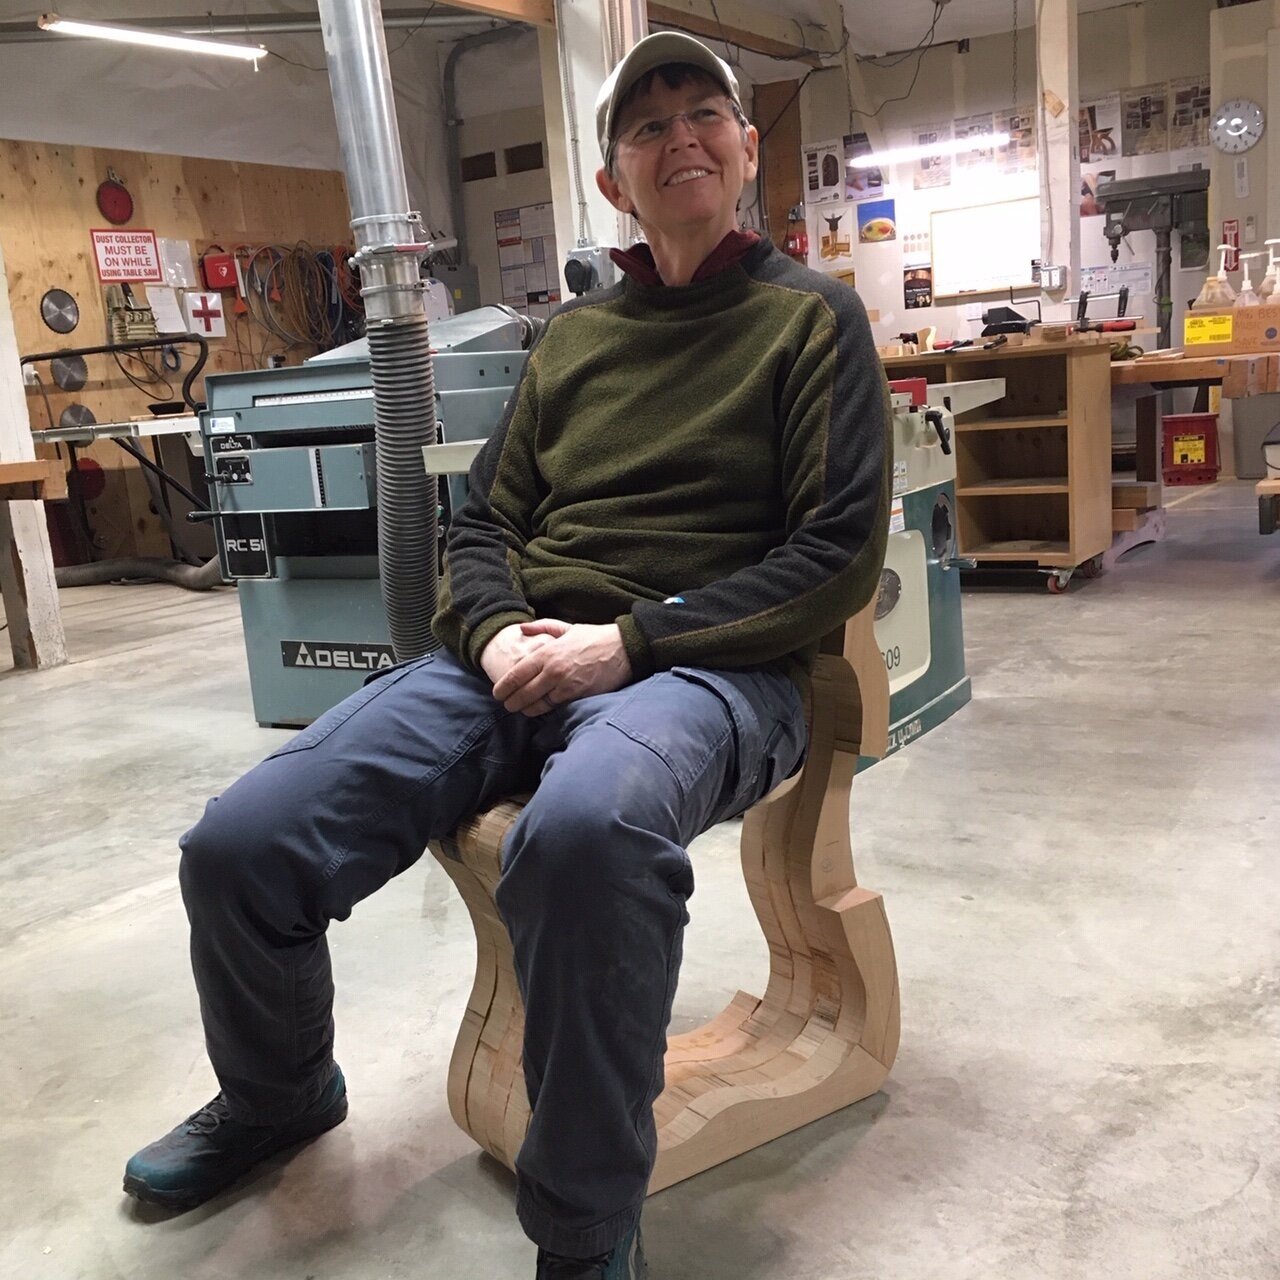 Curved Furniture 2019 with Kevin Reiswig and Seth Rolland